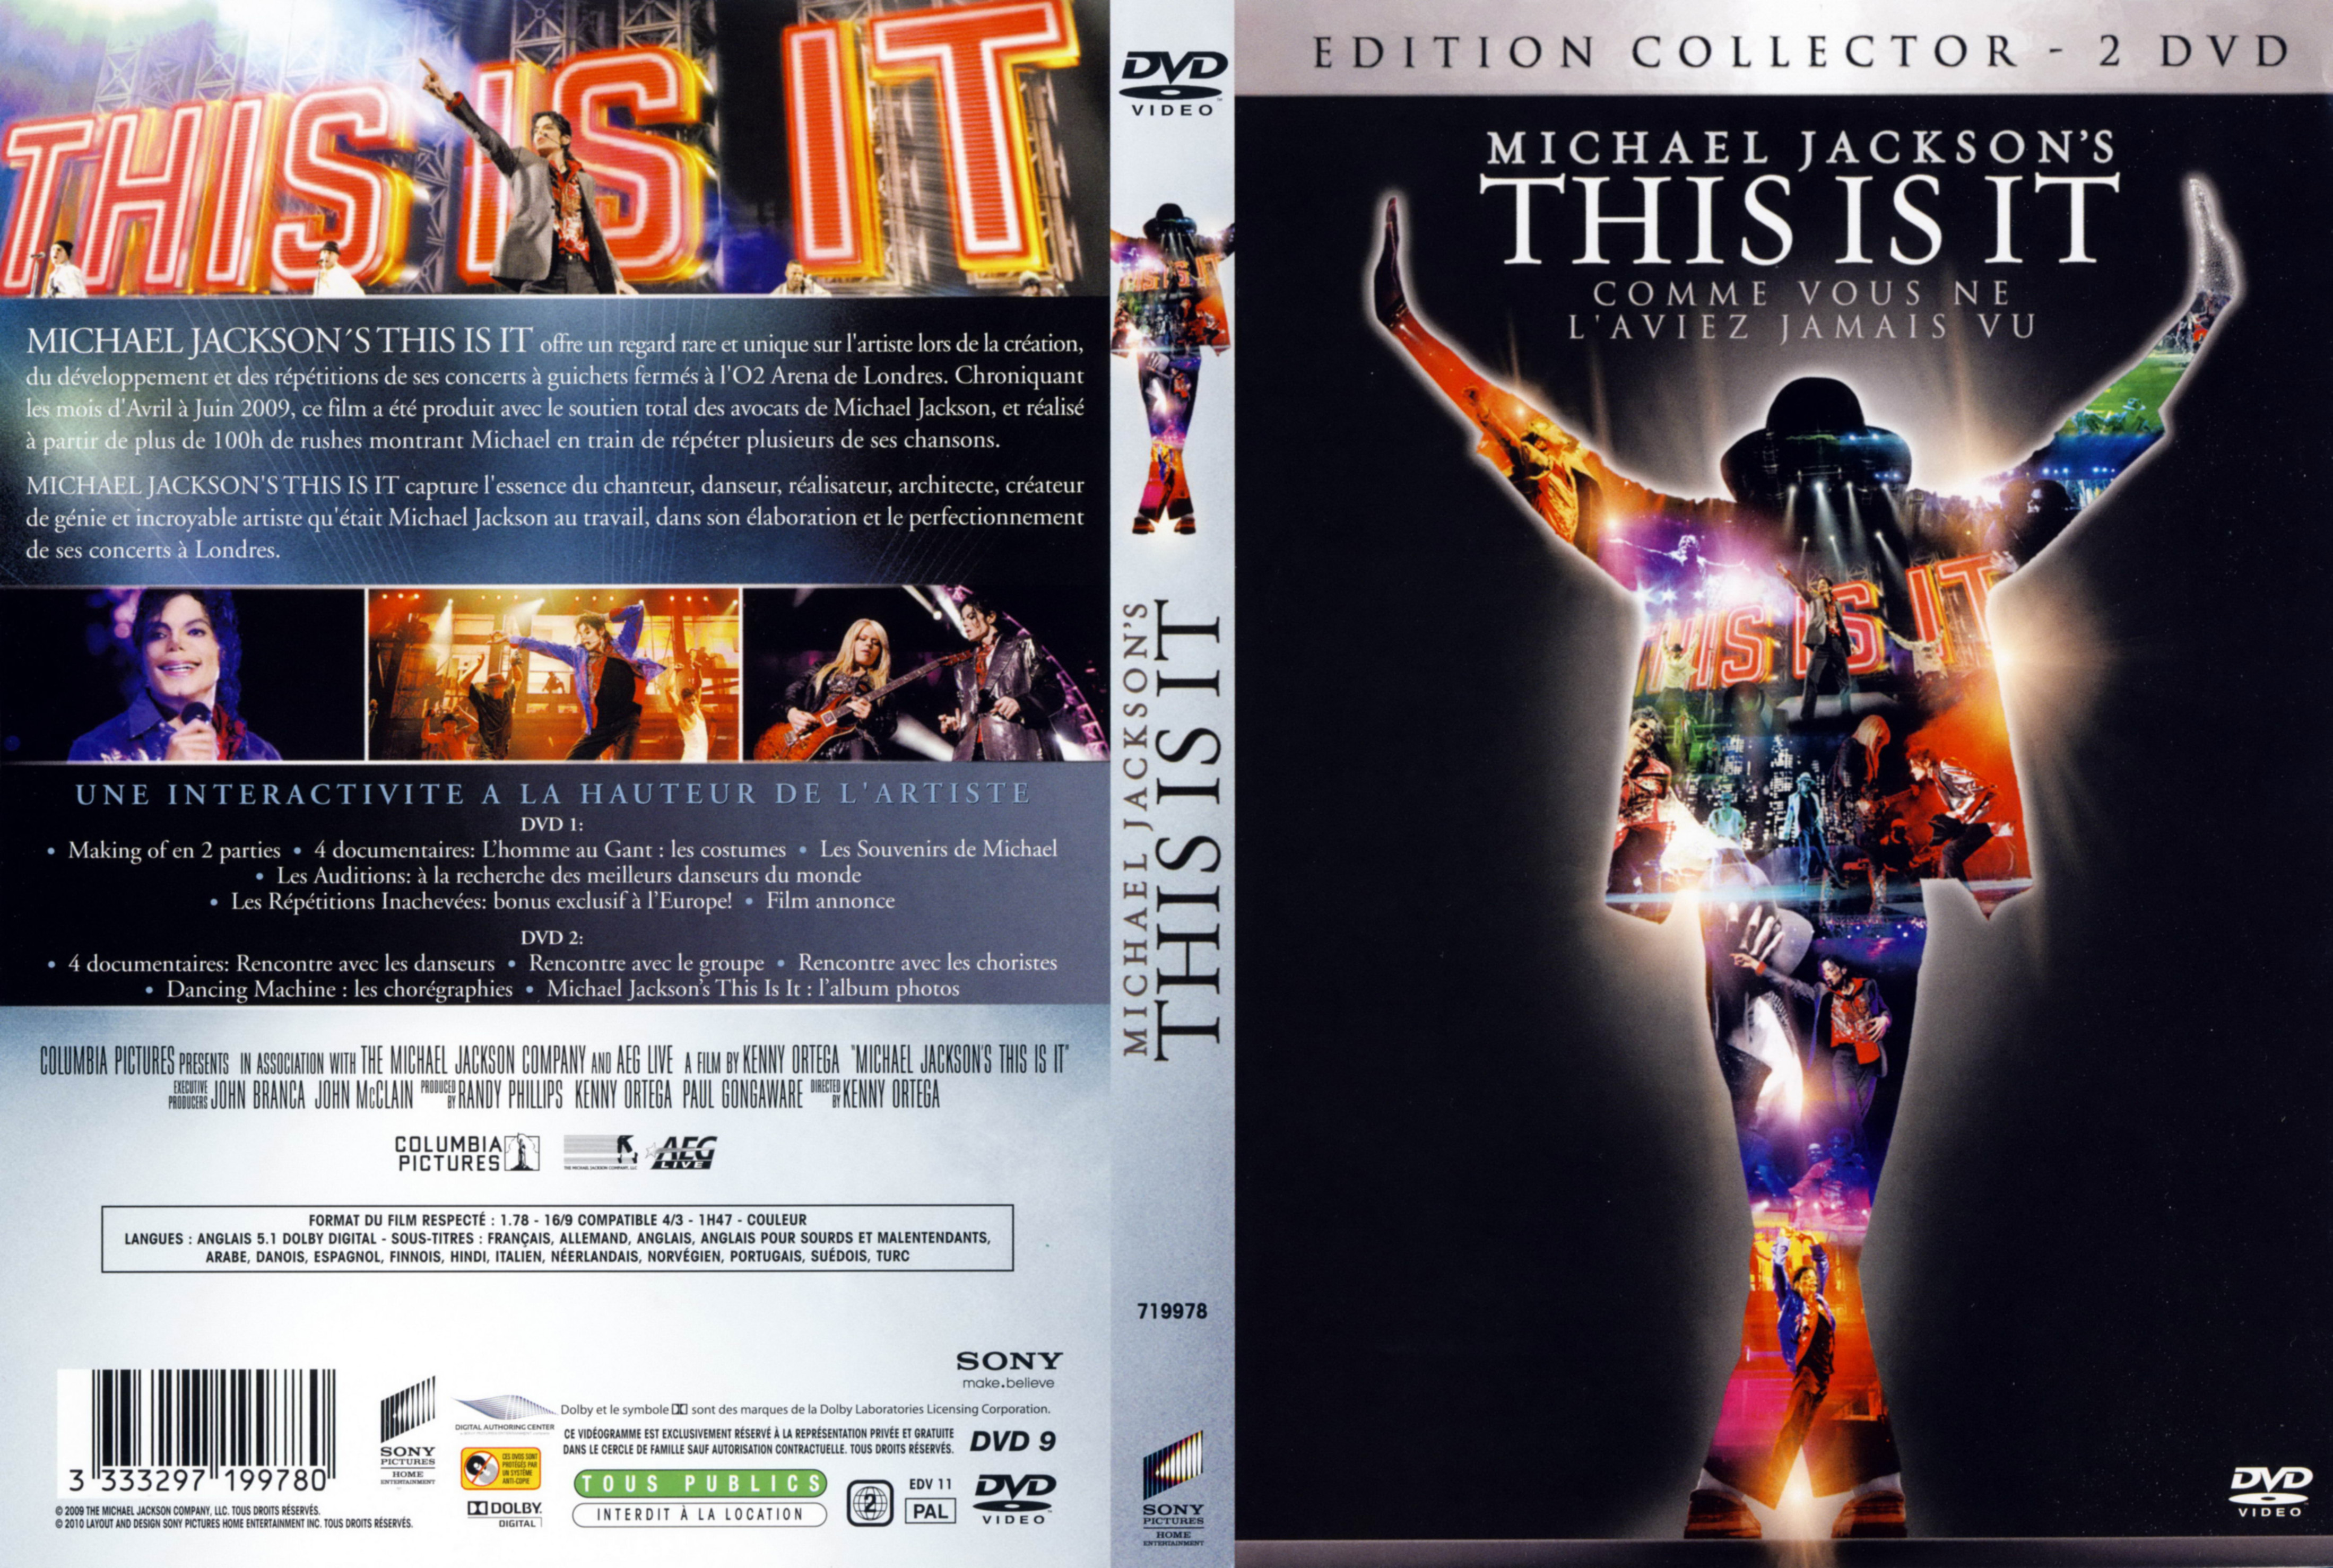 Jaquette DVD This is it v2